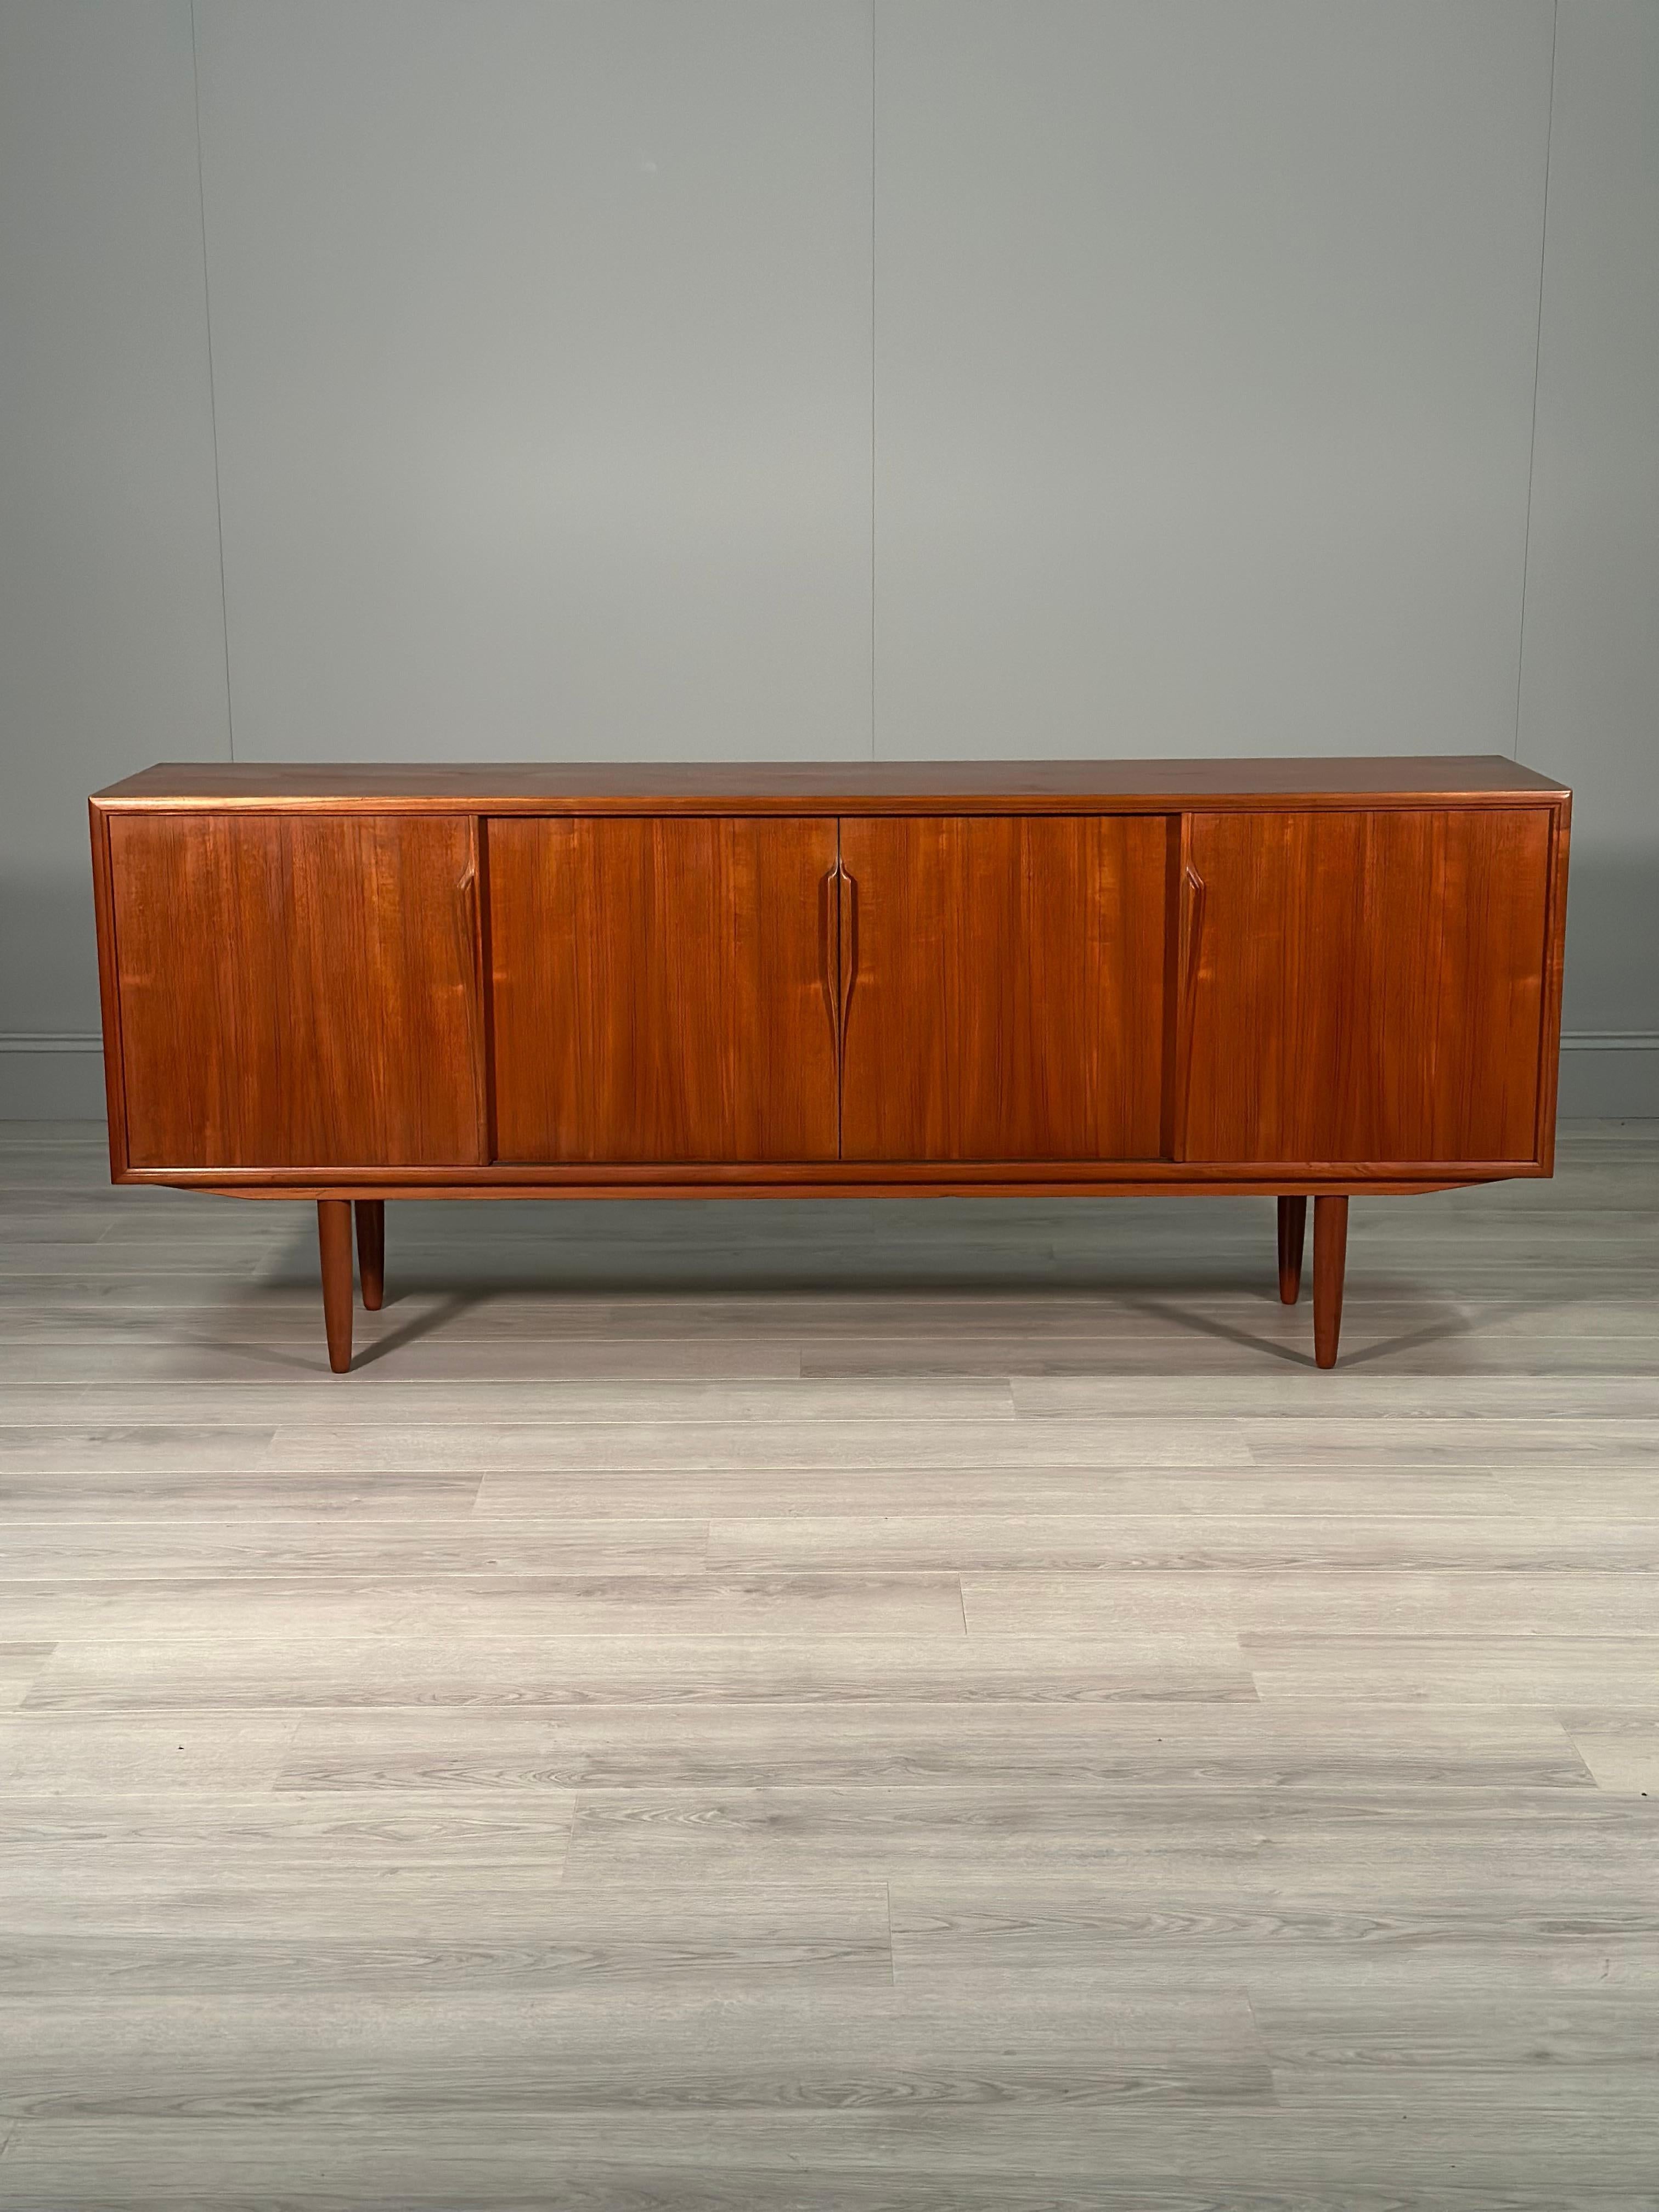 This sideboard is designed by Axel Christensen and manufactured by ACO Møbler Denmark in the 1960s. The sideboard consits of 4 sliding doors with 2 side cupboards one being larger than the other and a centre space with 3 pull out drawers. The